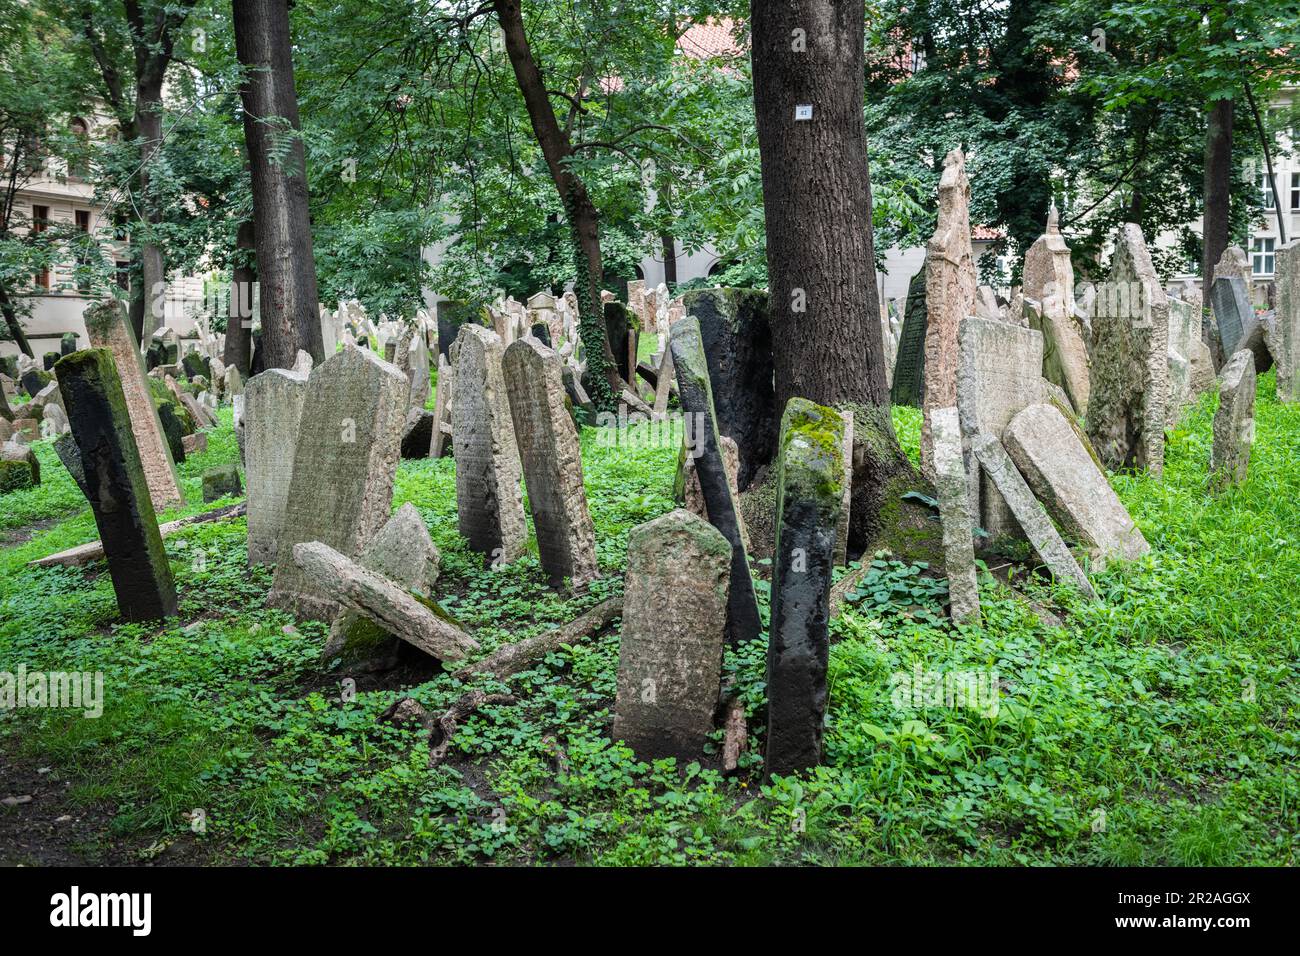 Tombstones in an Old Jewish Cemetery in Josefov district in Prague, capital of the Czech Republic. Stock Photo